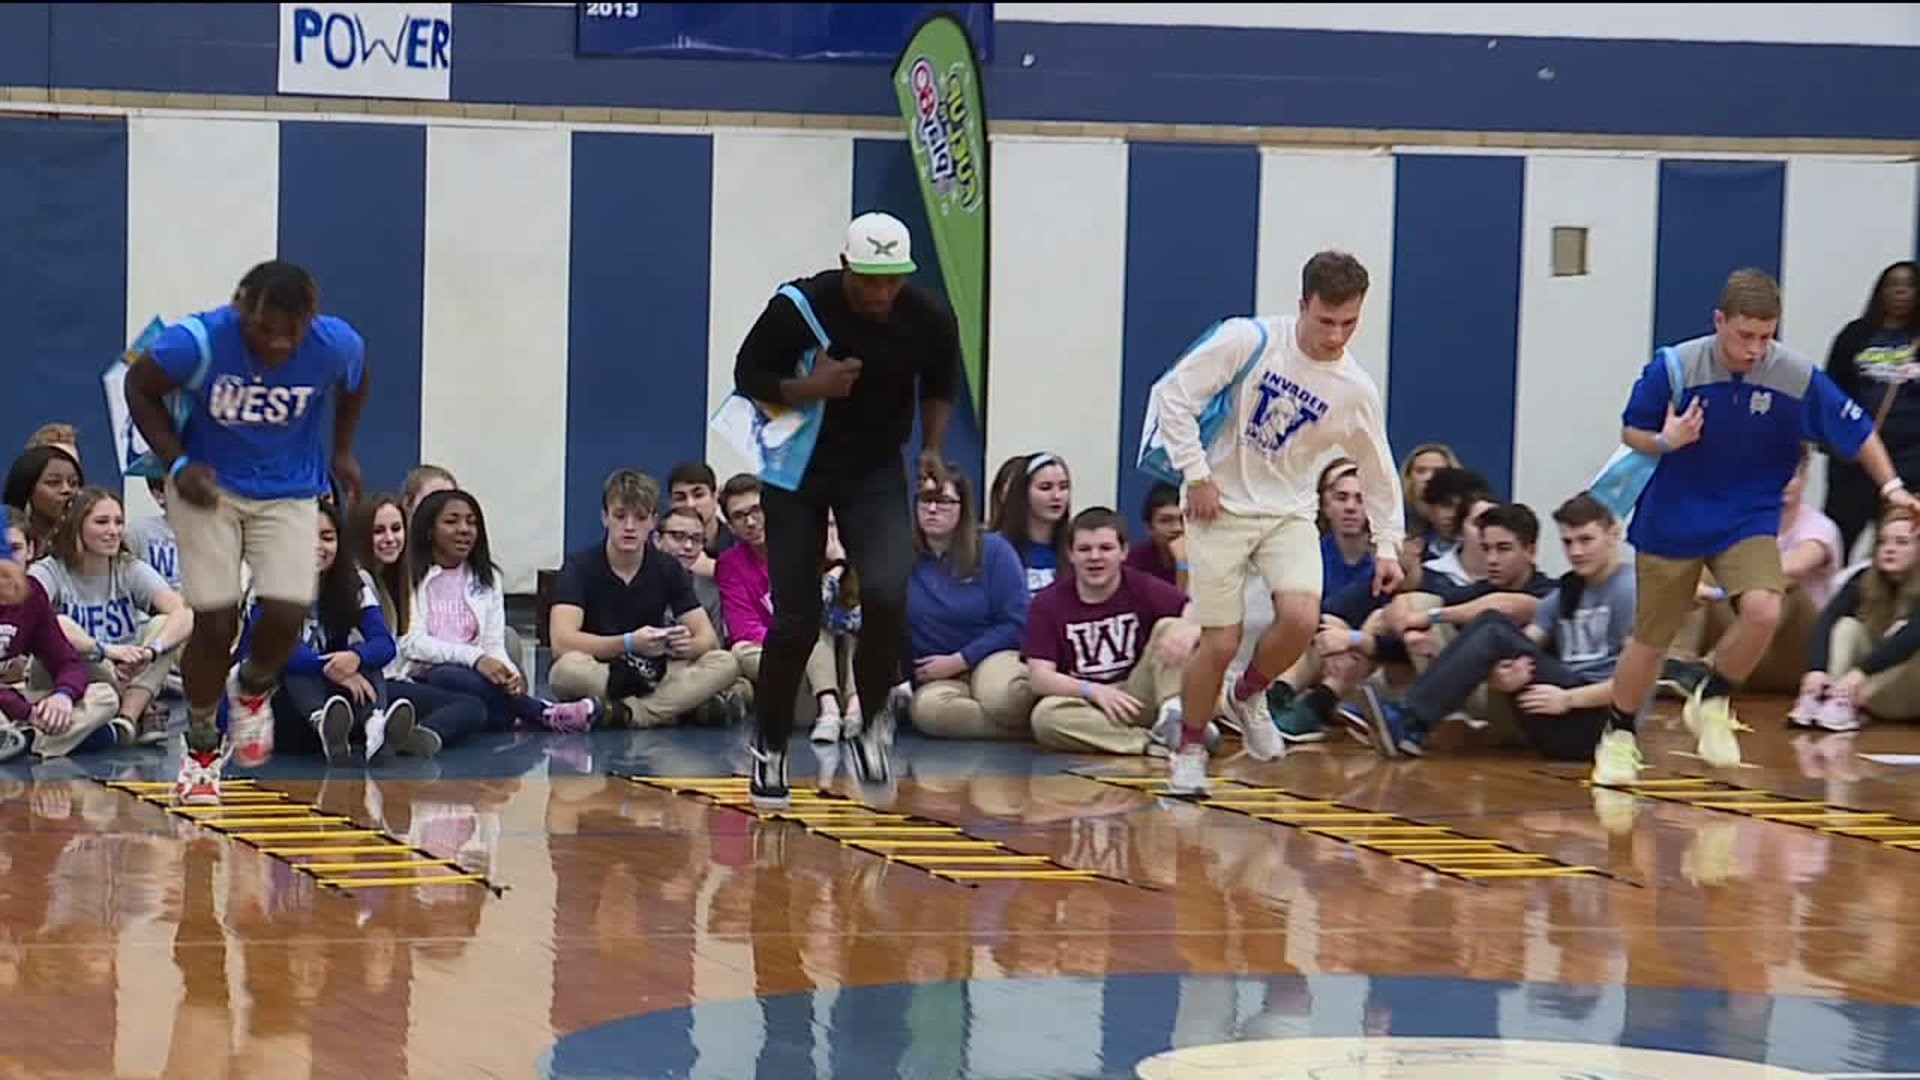 The NFL's 'Fuel up and Play 60' Campaign Energizes Students in West Scranton